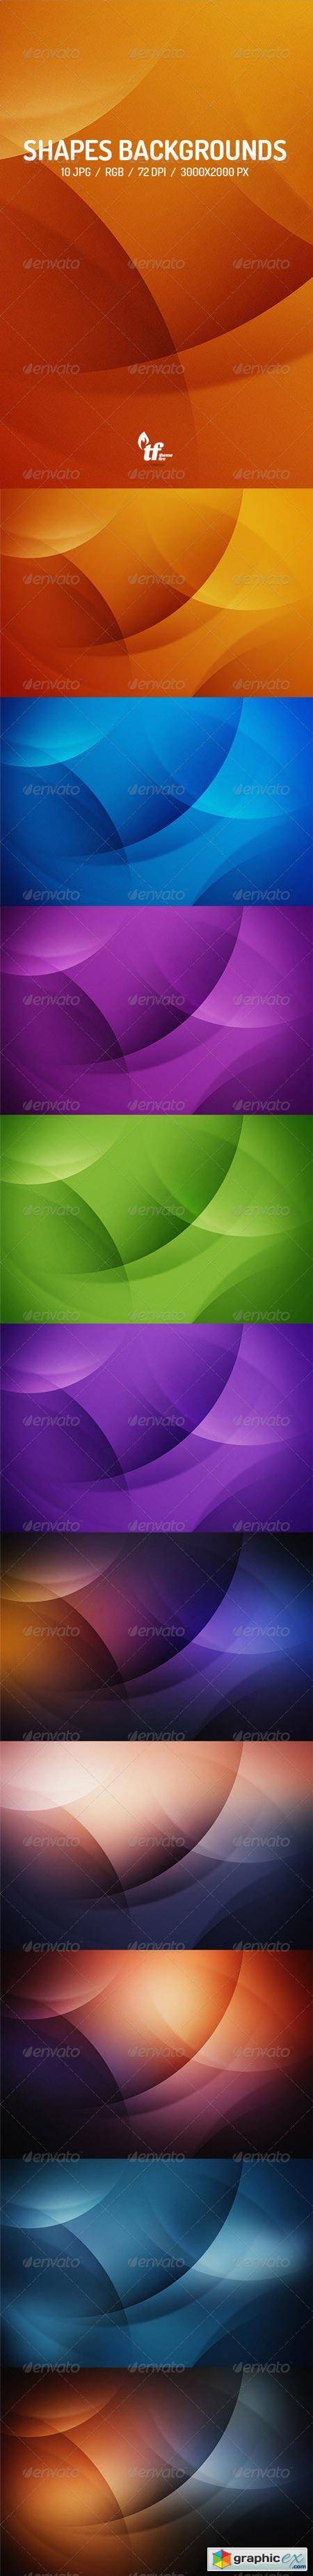 Shapes Backgrounds 7812806